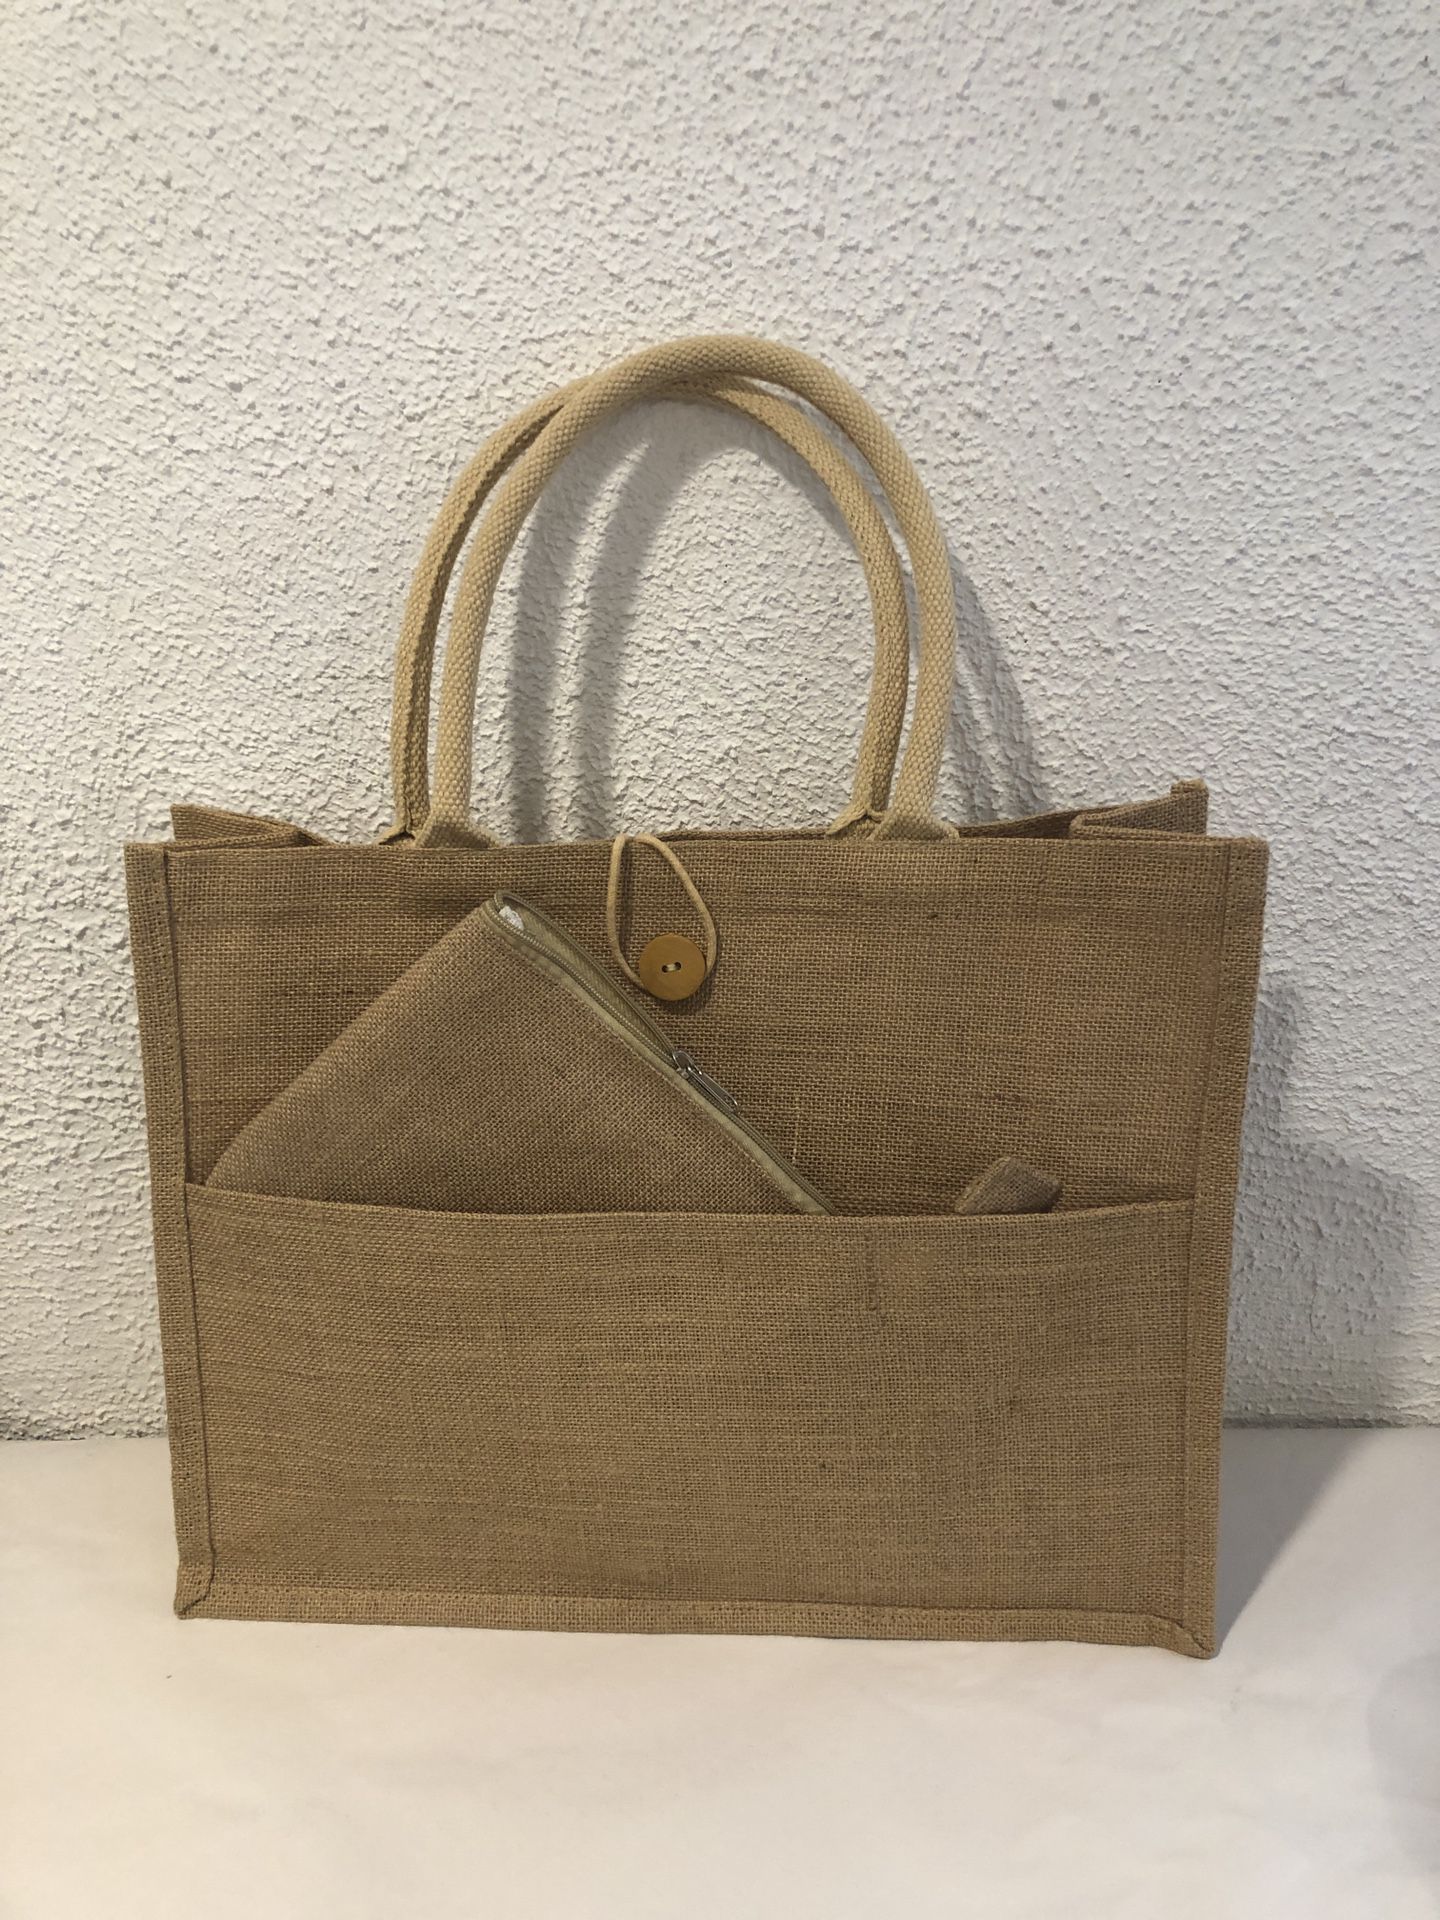 Beautiful Large Burlap Tote Bag With A  Small Wallet Bag